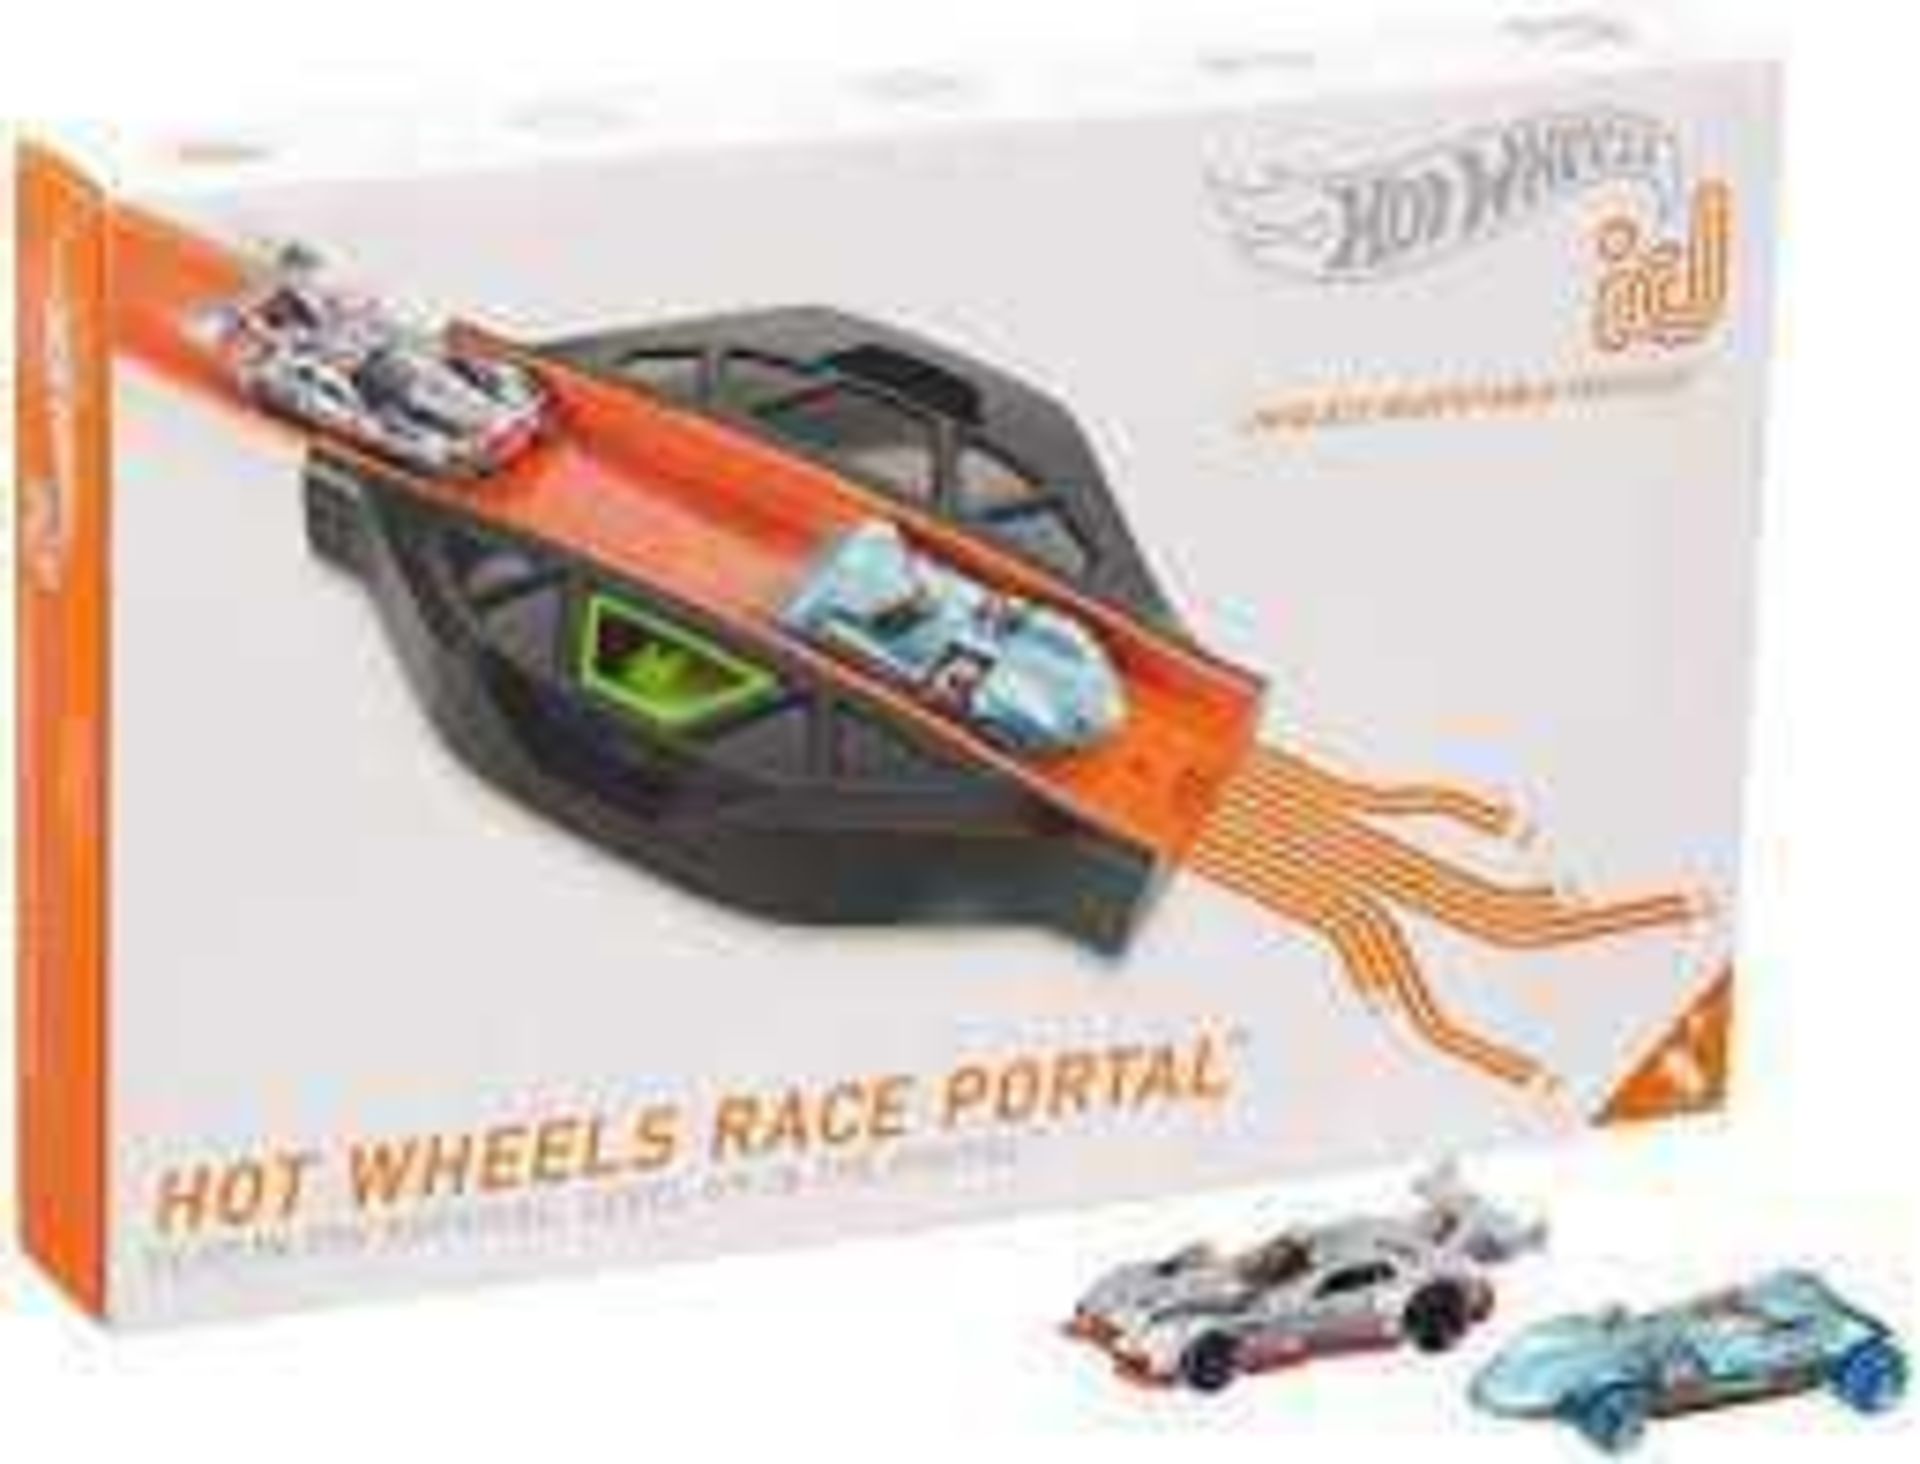 RRP £45 Each Boxed Hot Wheels Id Race Portal Complete With Two Racing Cars